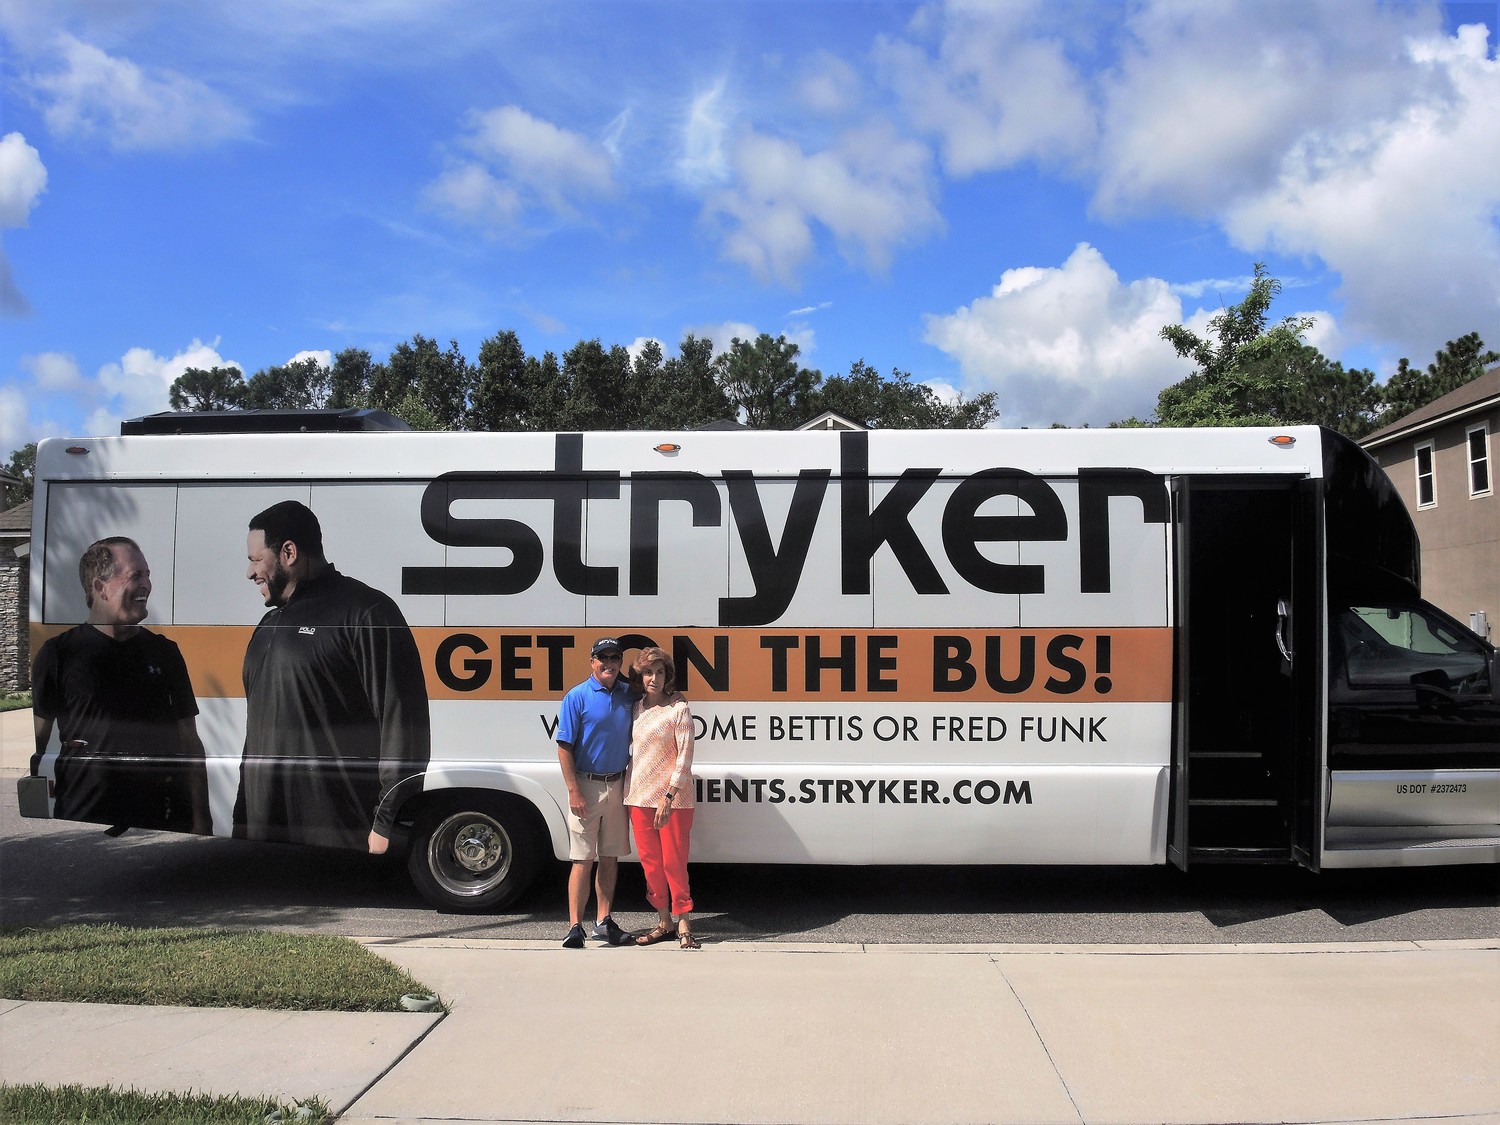 PGA Tour Champions golfer and Ponte Vedra Beach resident Fred Funk stands alongside Carol Simpson, who was the winner of Stryker’s “Get on the Bus” contest in Jacksonville.